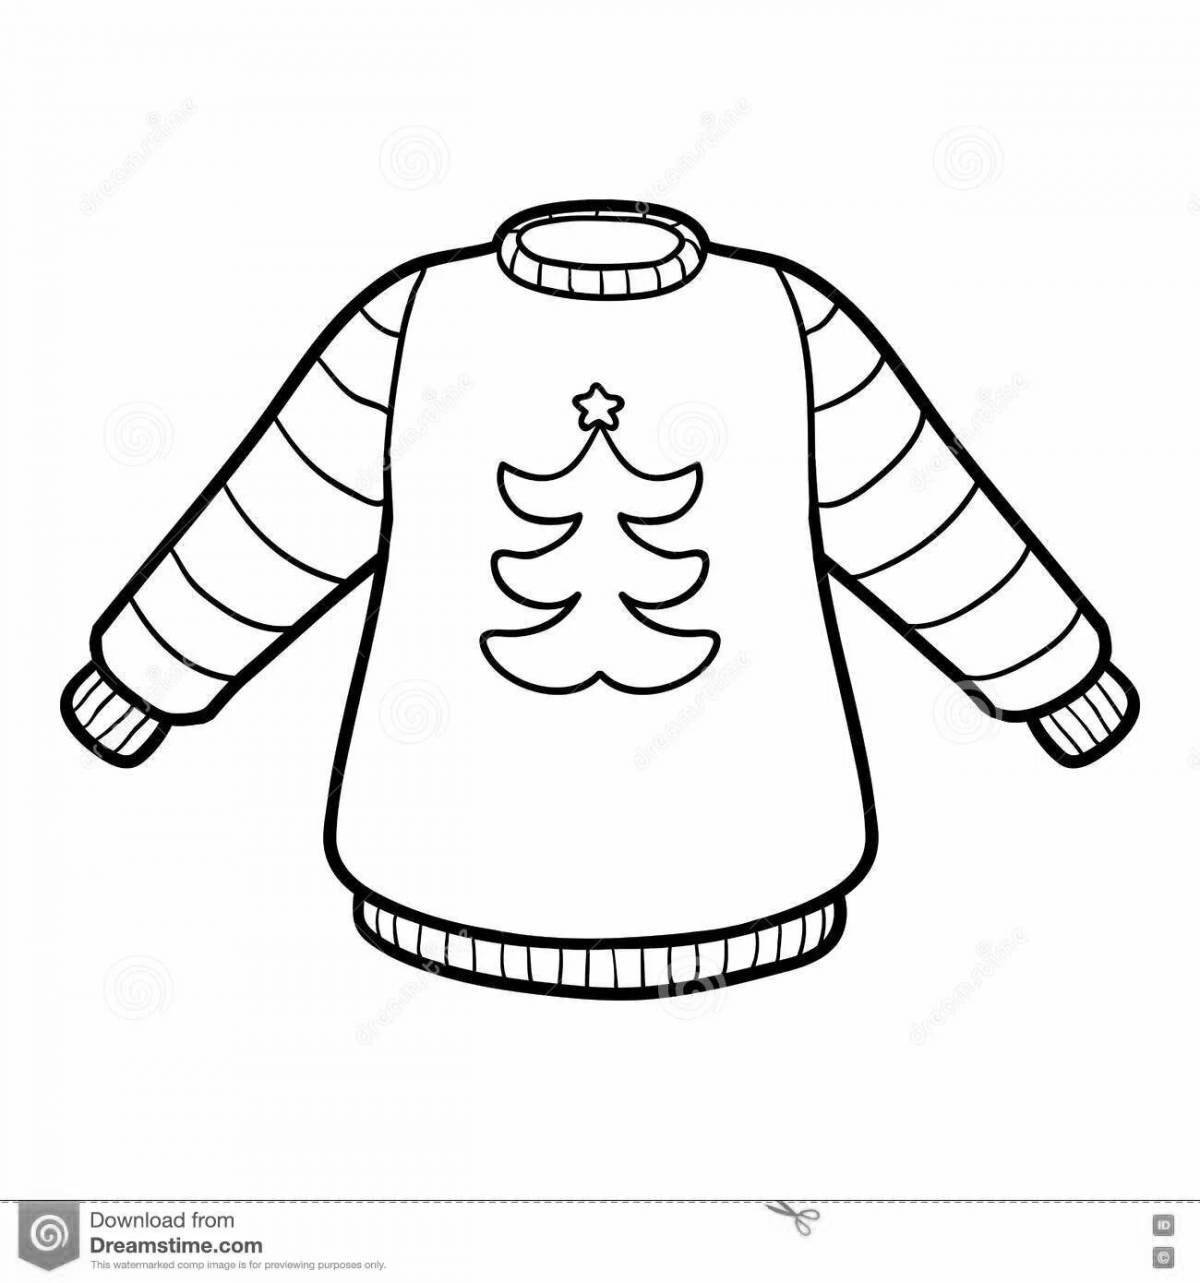 Adorable winter clothes coloring page for 6-7 year olds